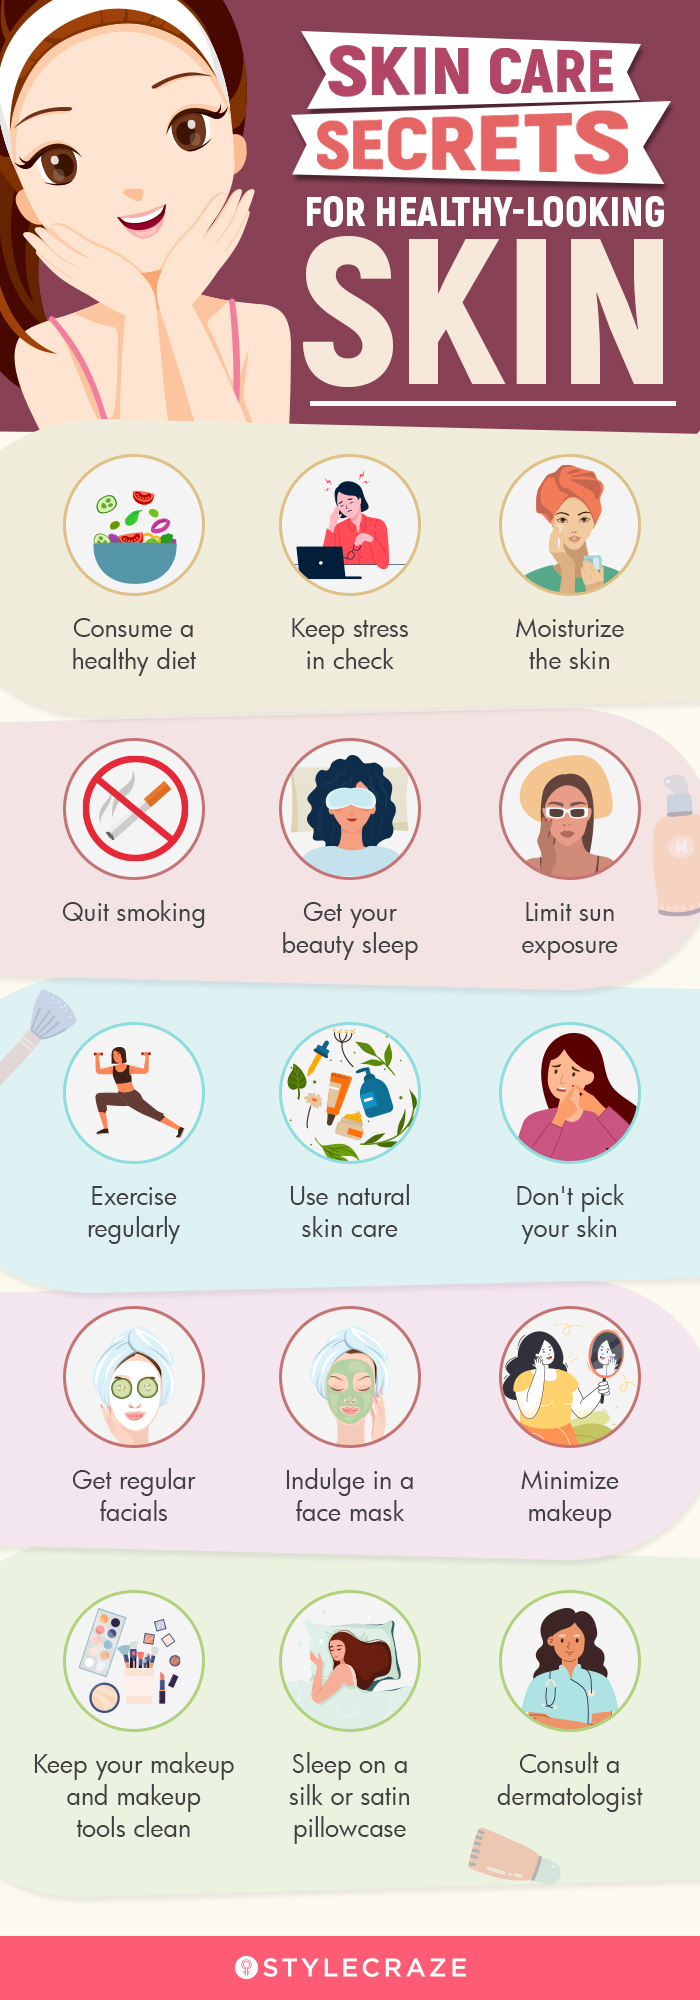 skin care secrets for healthy skin [infographic]